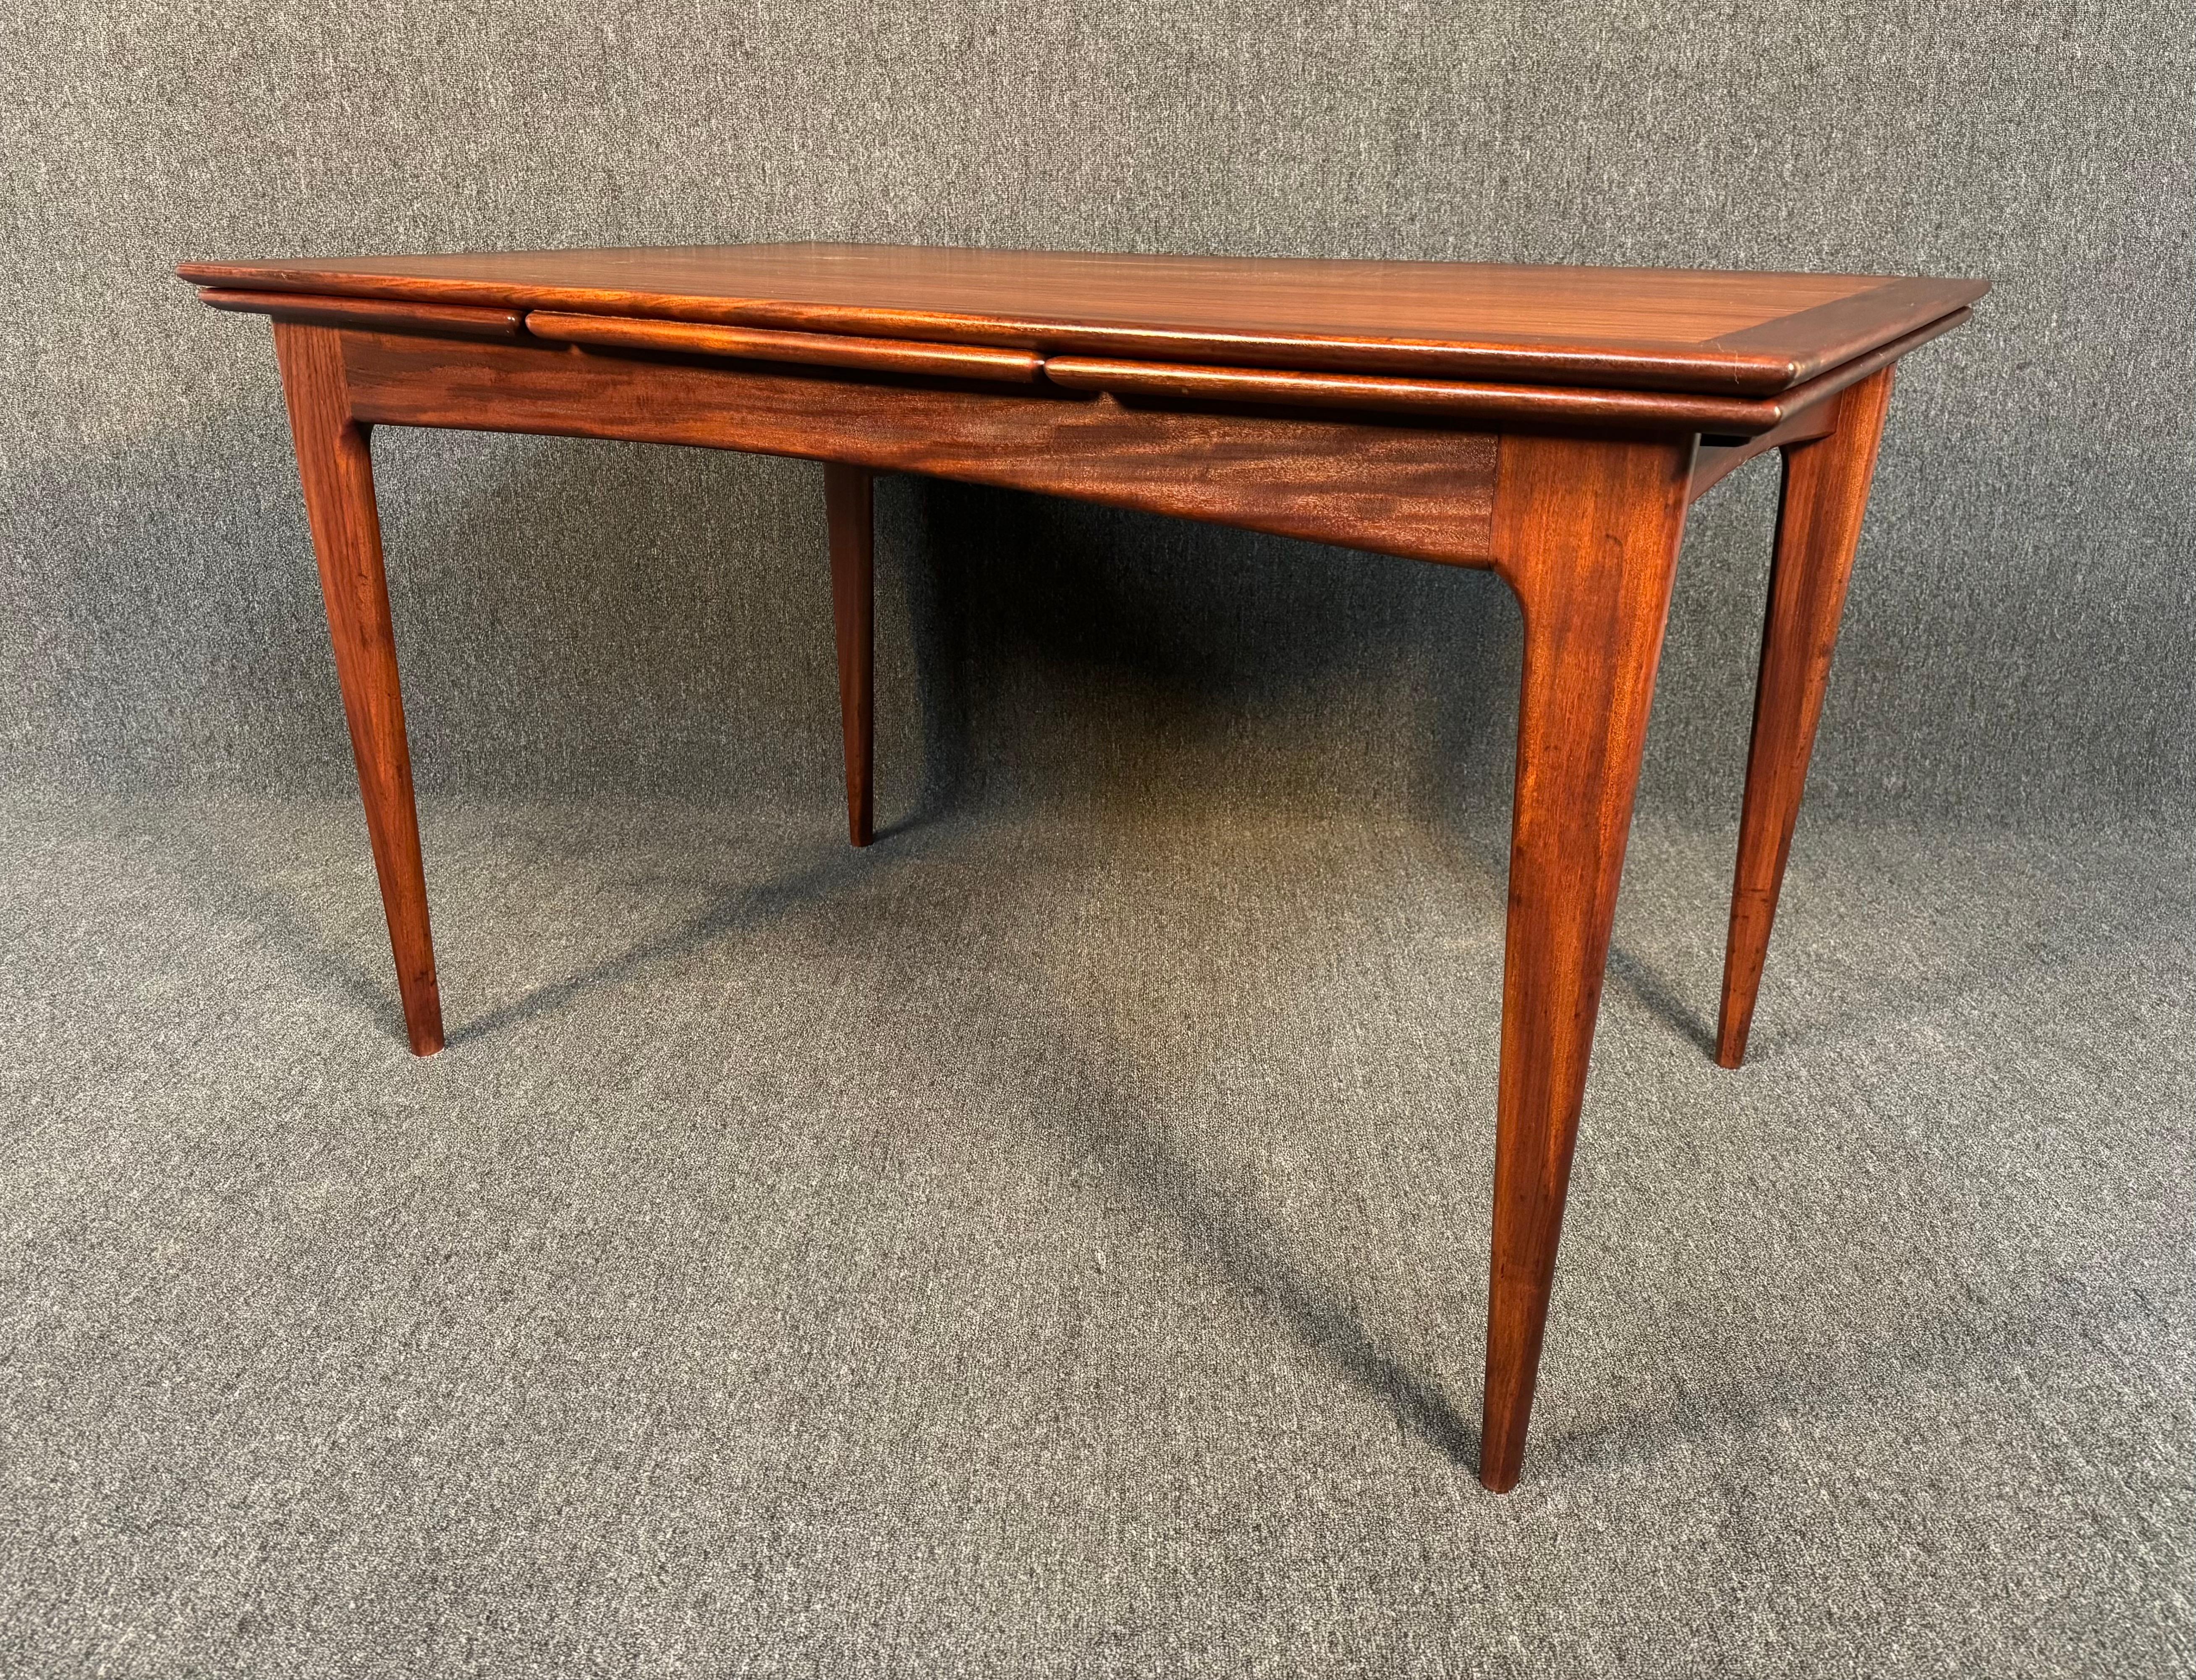 Here is a beautiful British MCM dining table in African teak manufactured by A. Younger Ltd in England on the 1960's.
This lovely table, which design is reminiscent of Niels Otto Moller, was recently imported form UK to California before its